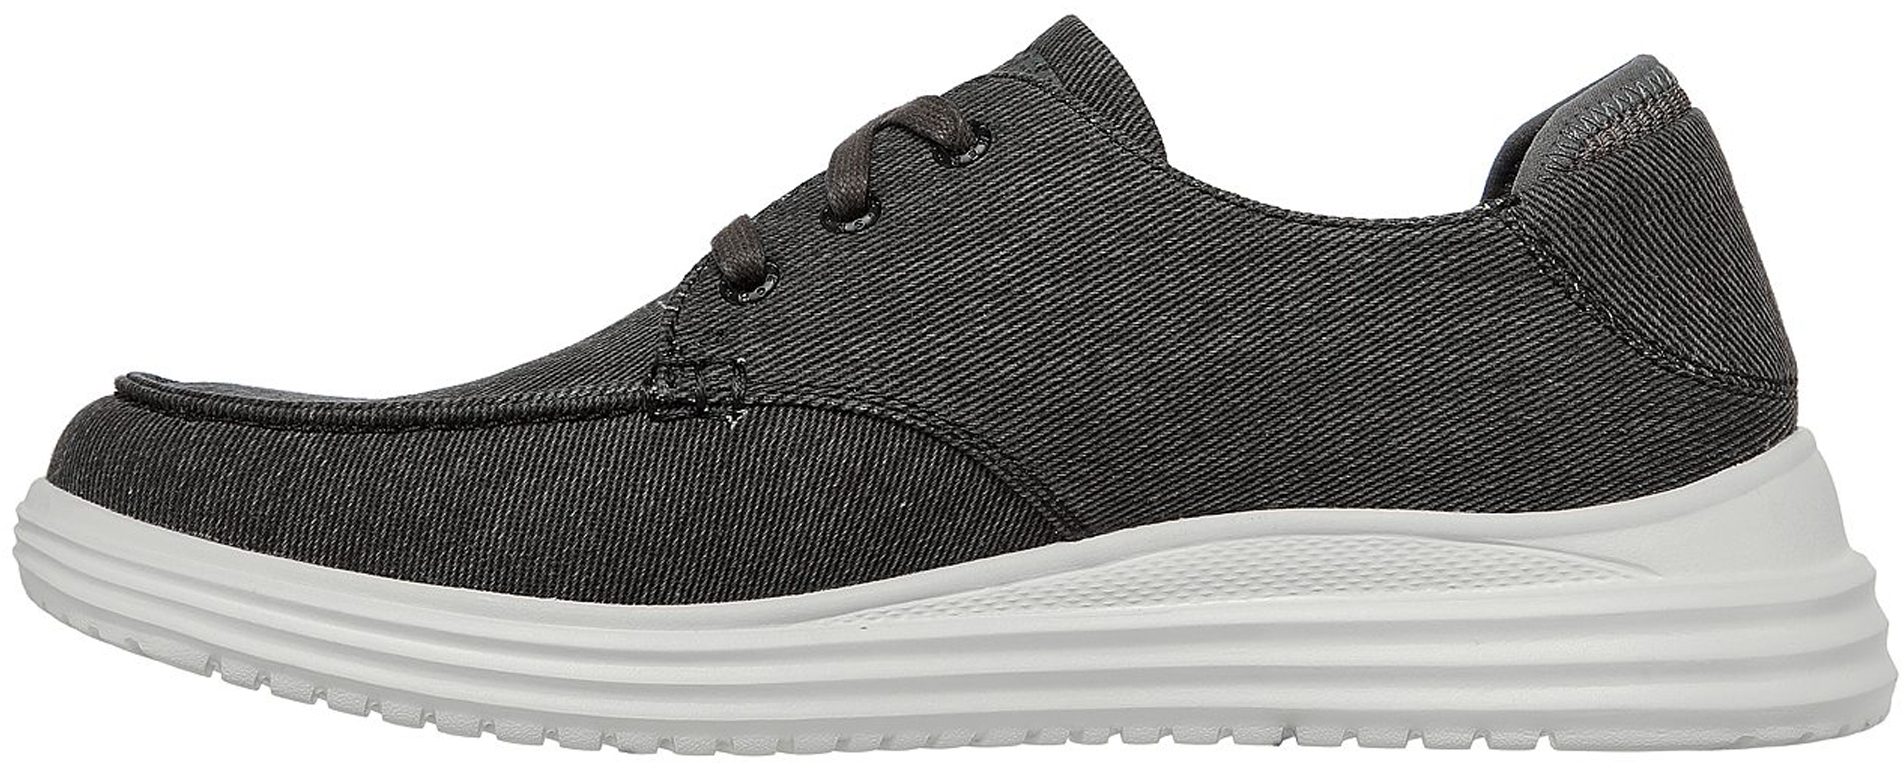 Skechers Proven - Forenzo Black 204471 BLK - Casual Shoes - Humphries Shoes